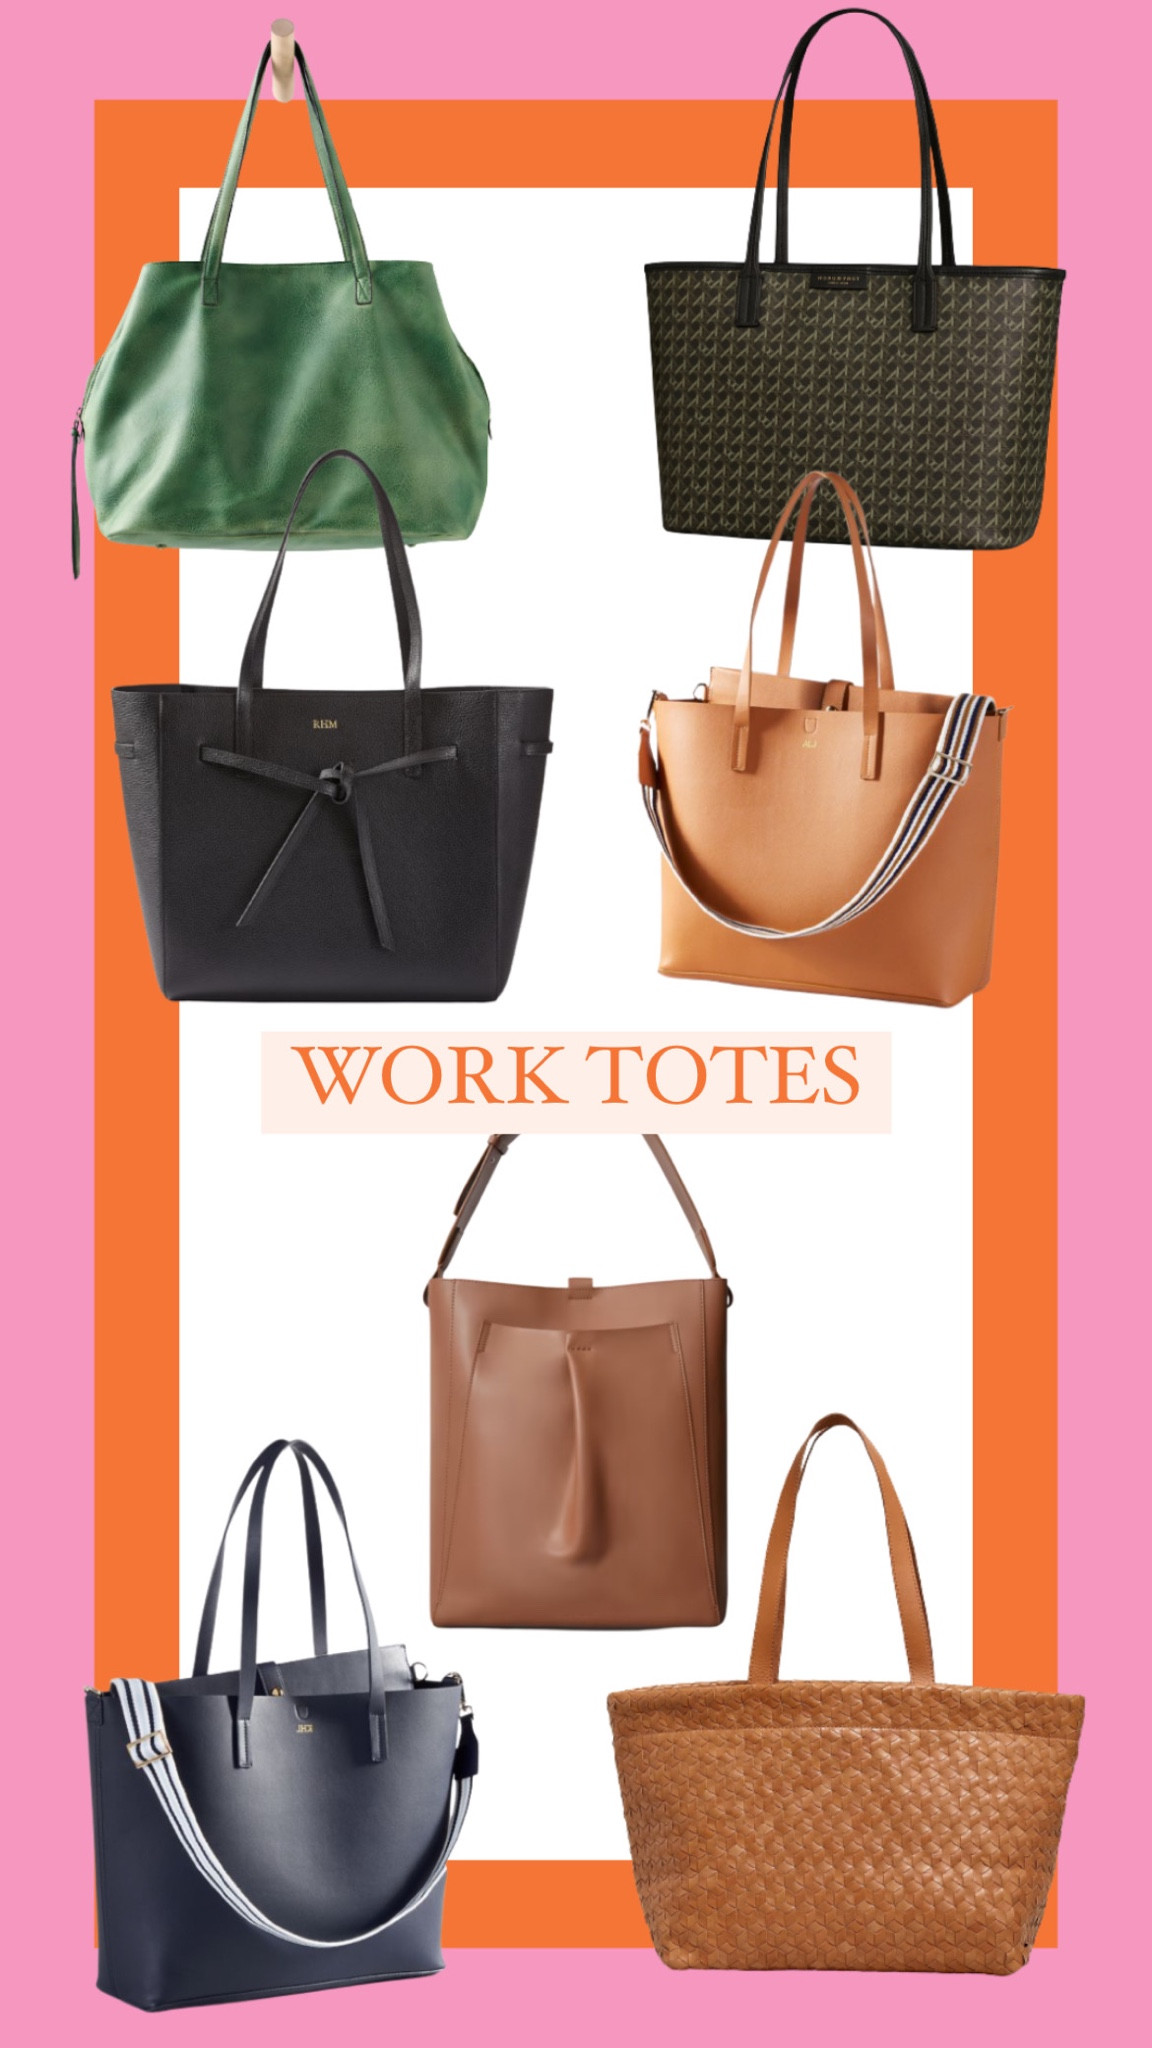 Tory Burch Ever-Ready Tote curated on LTK